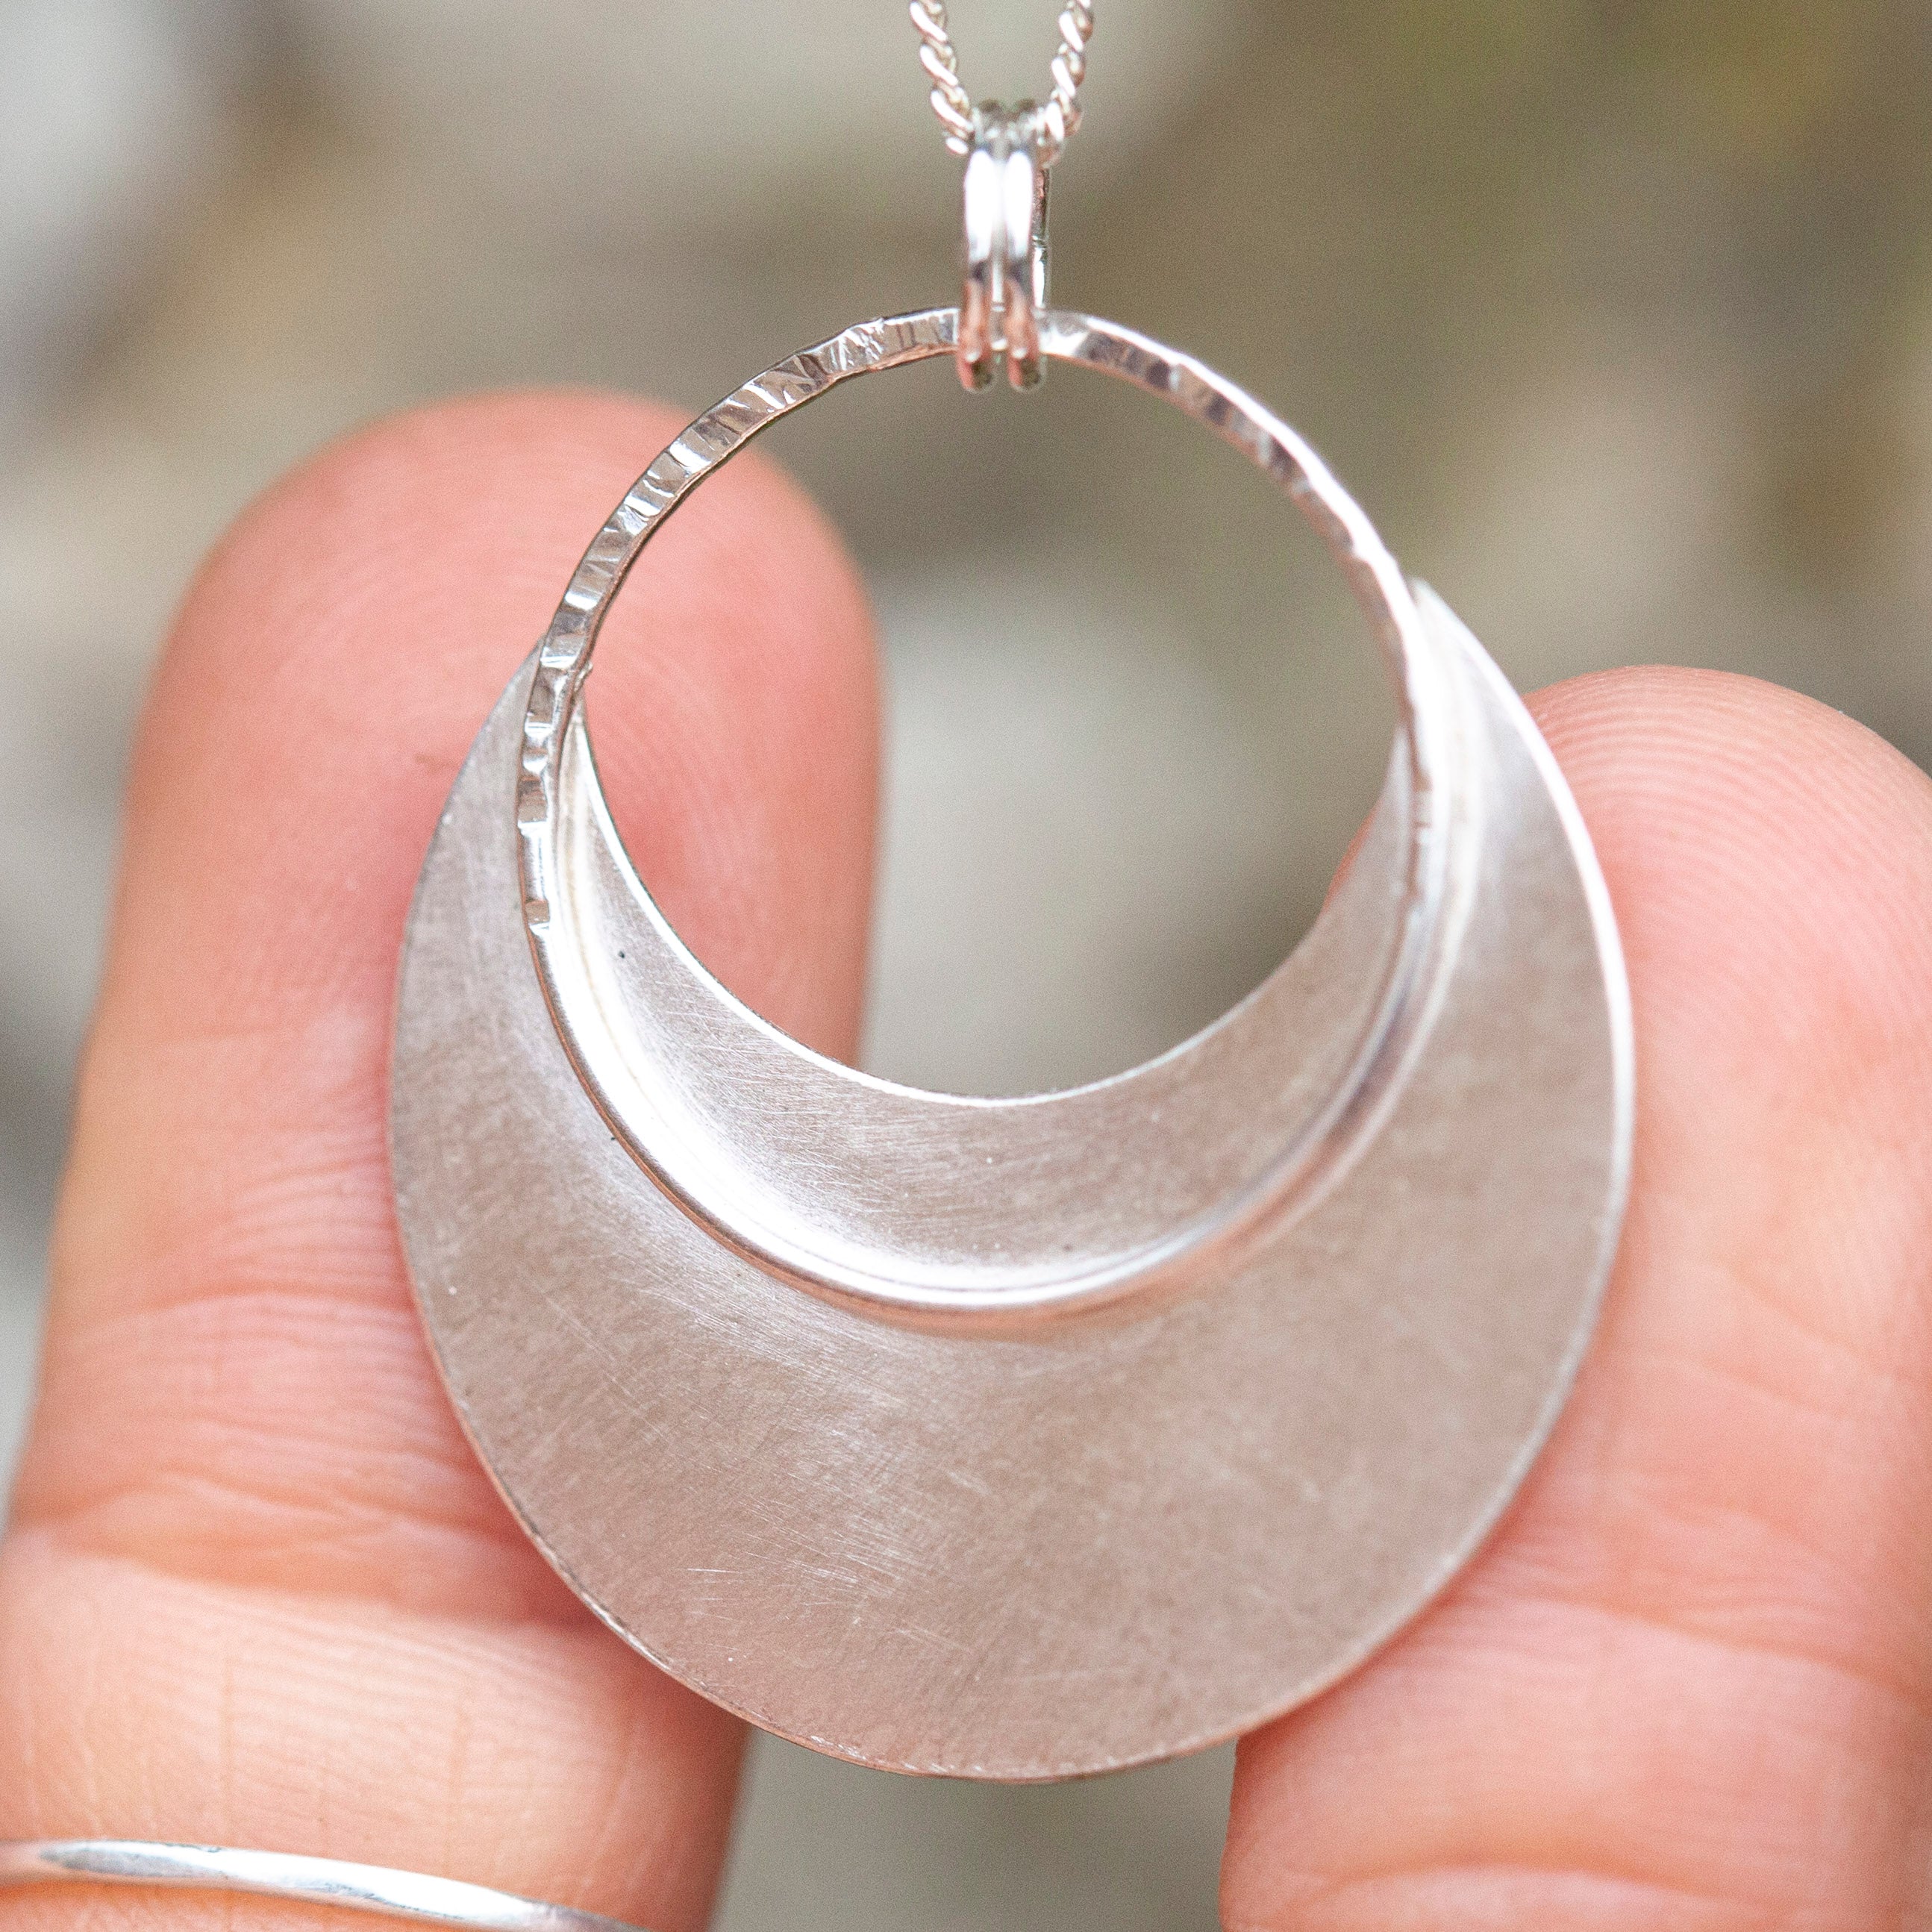 OOAK • Crescent moon pendant in silver #3  (ready to ship)